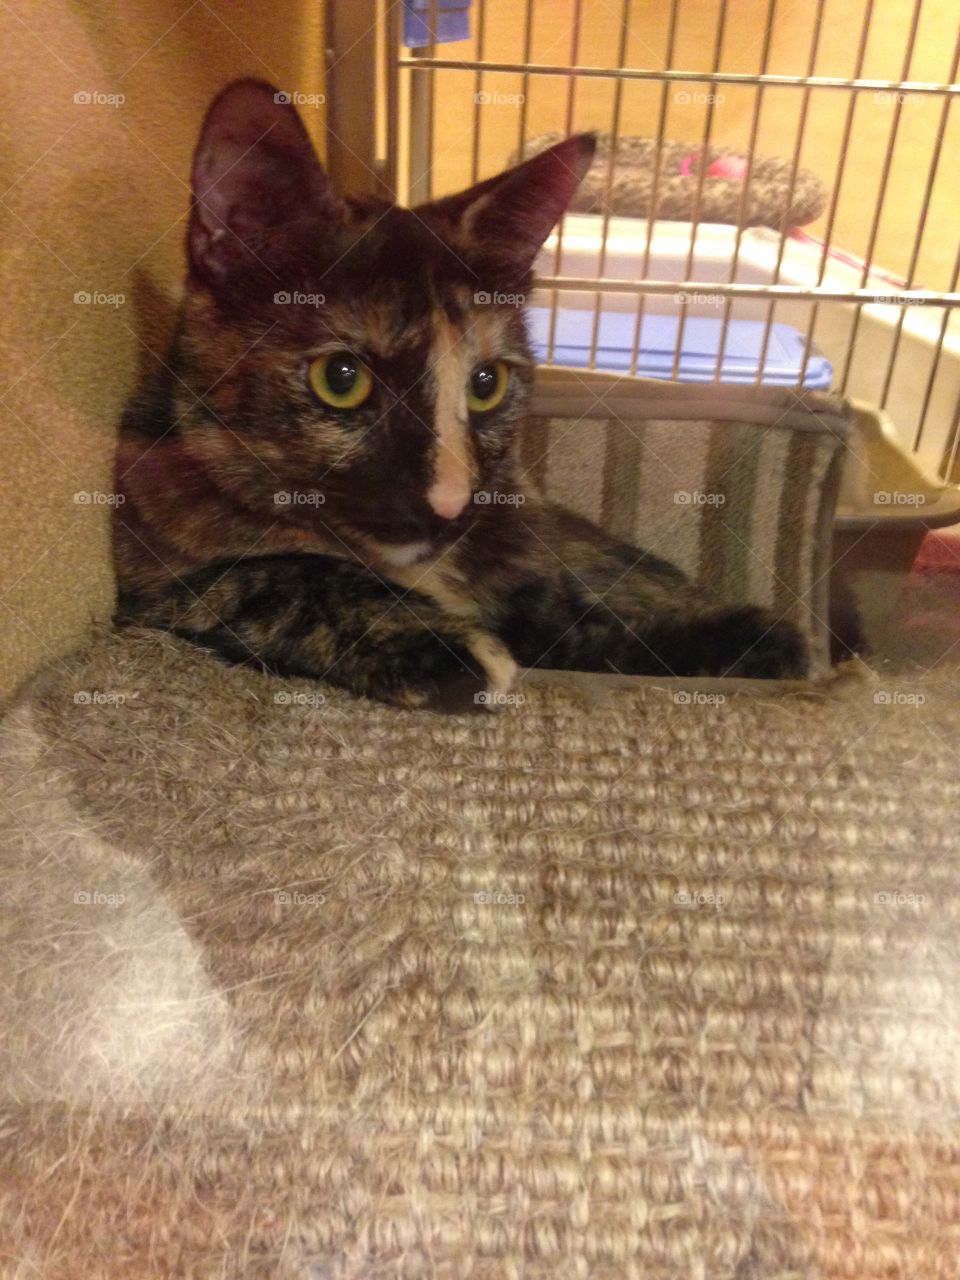 Waiting for Adoption. A calico kitten cat inside plexiglass is patiently waiting for adoption.